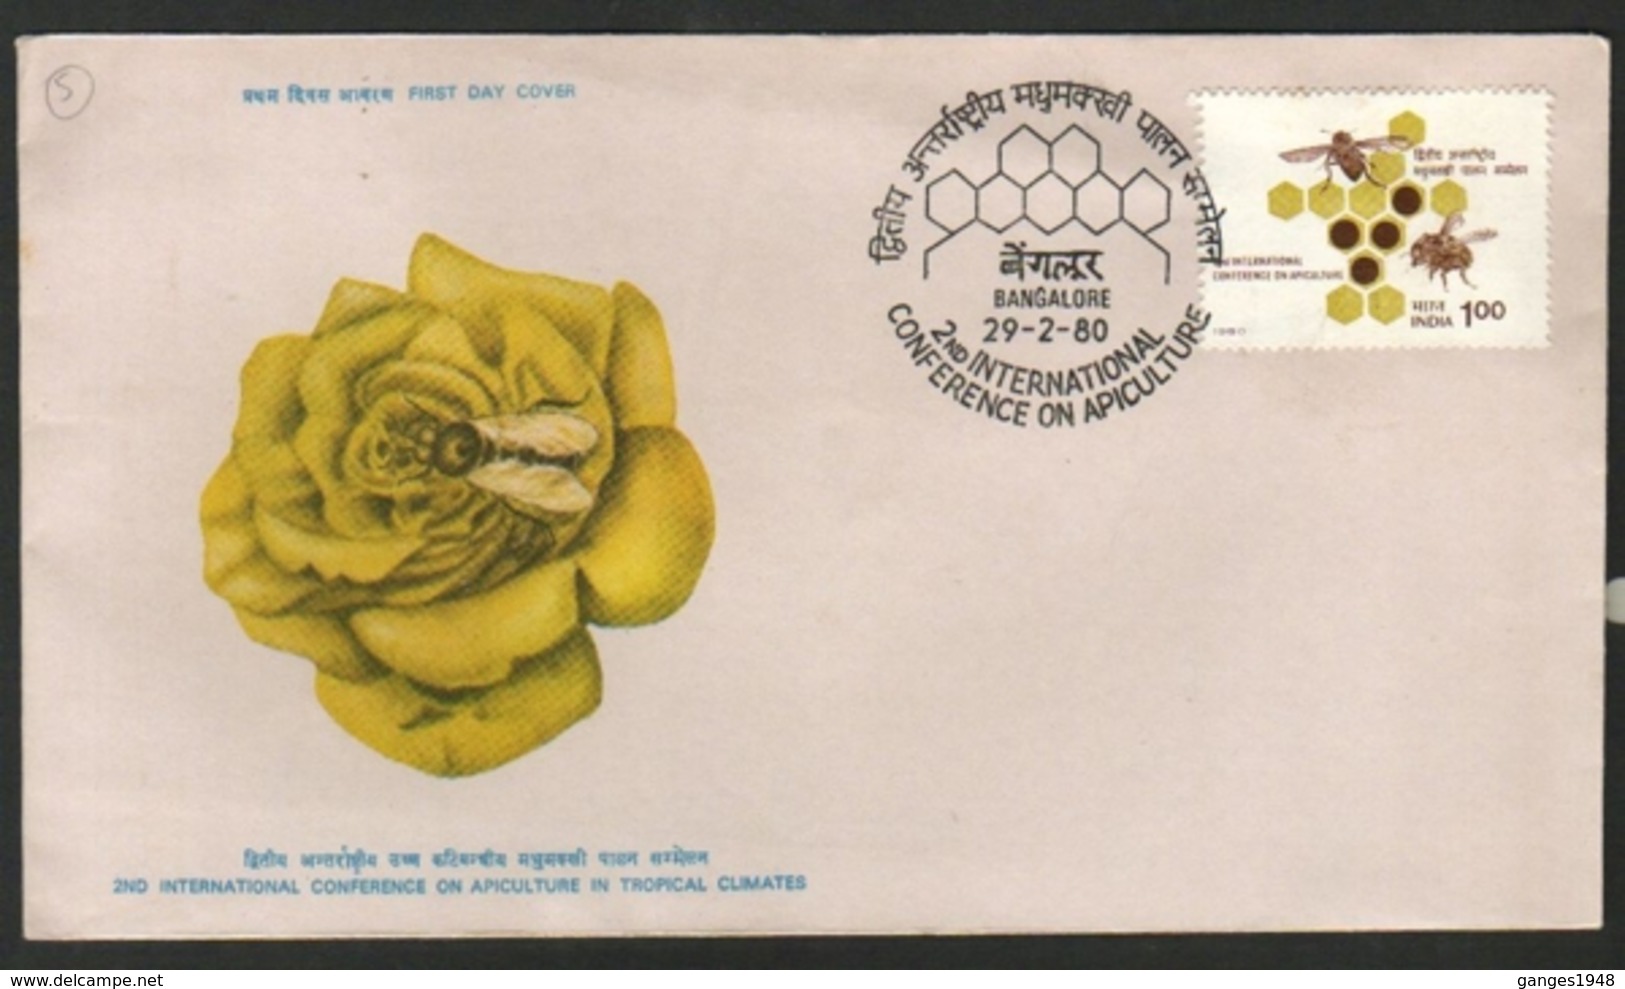 India  1980 Honeybees - 2nd Internation Conference On Apiculture  Bangalore  FD Cover  # 18861   D  Inde Indien - Honeybees